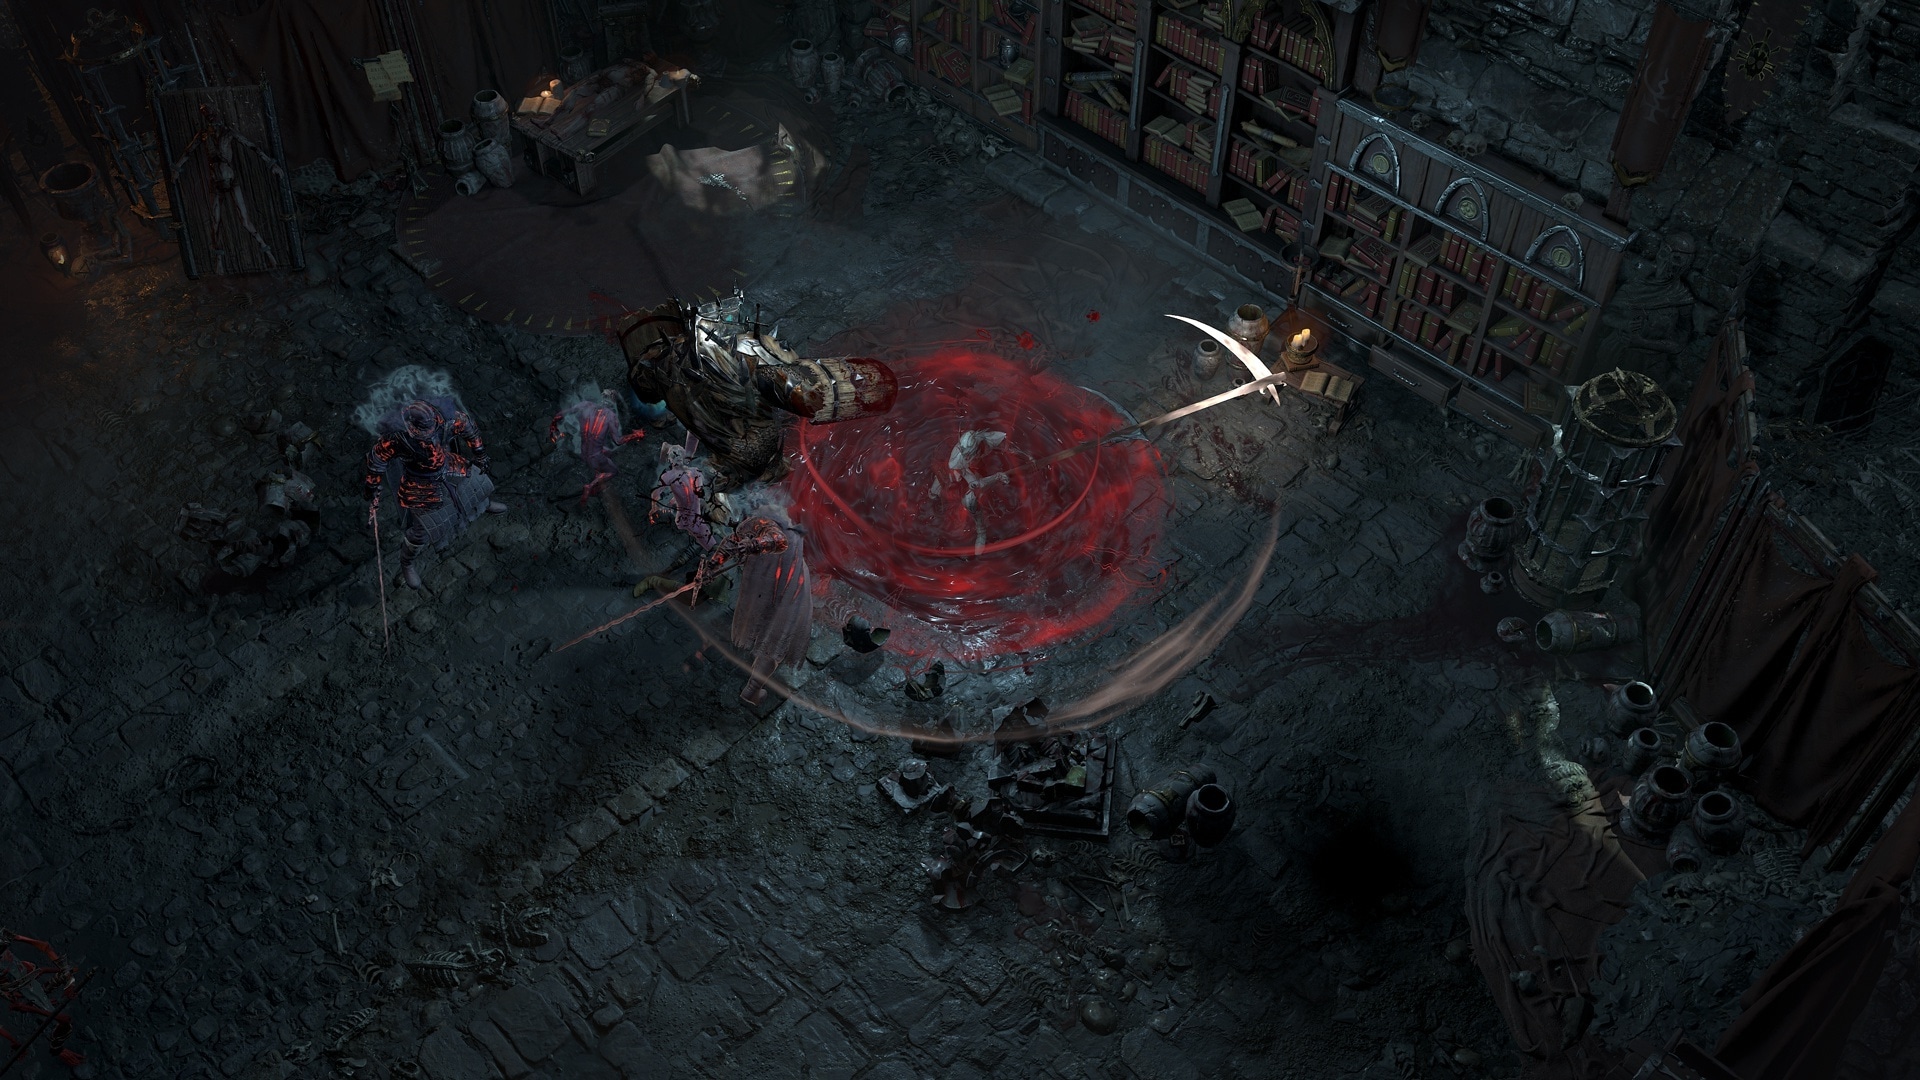 Diablo 4 promises huge changes coming with Season of Blood, will it be  enough to tempt players back?